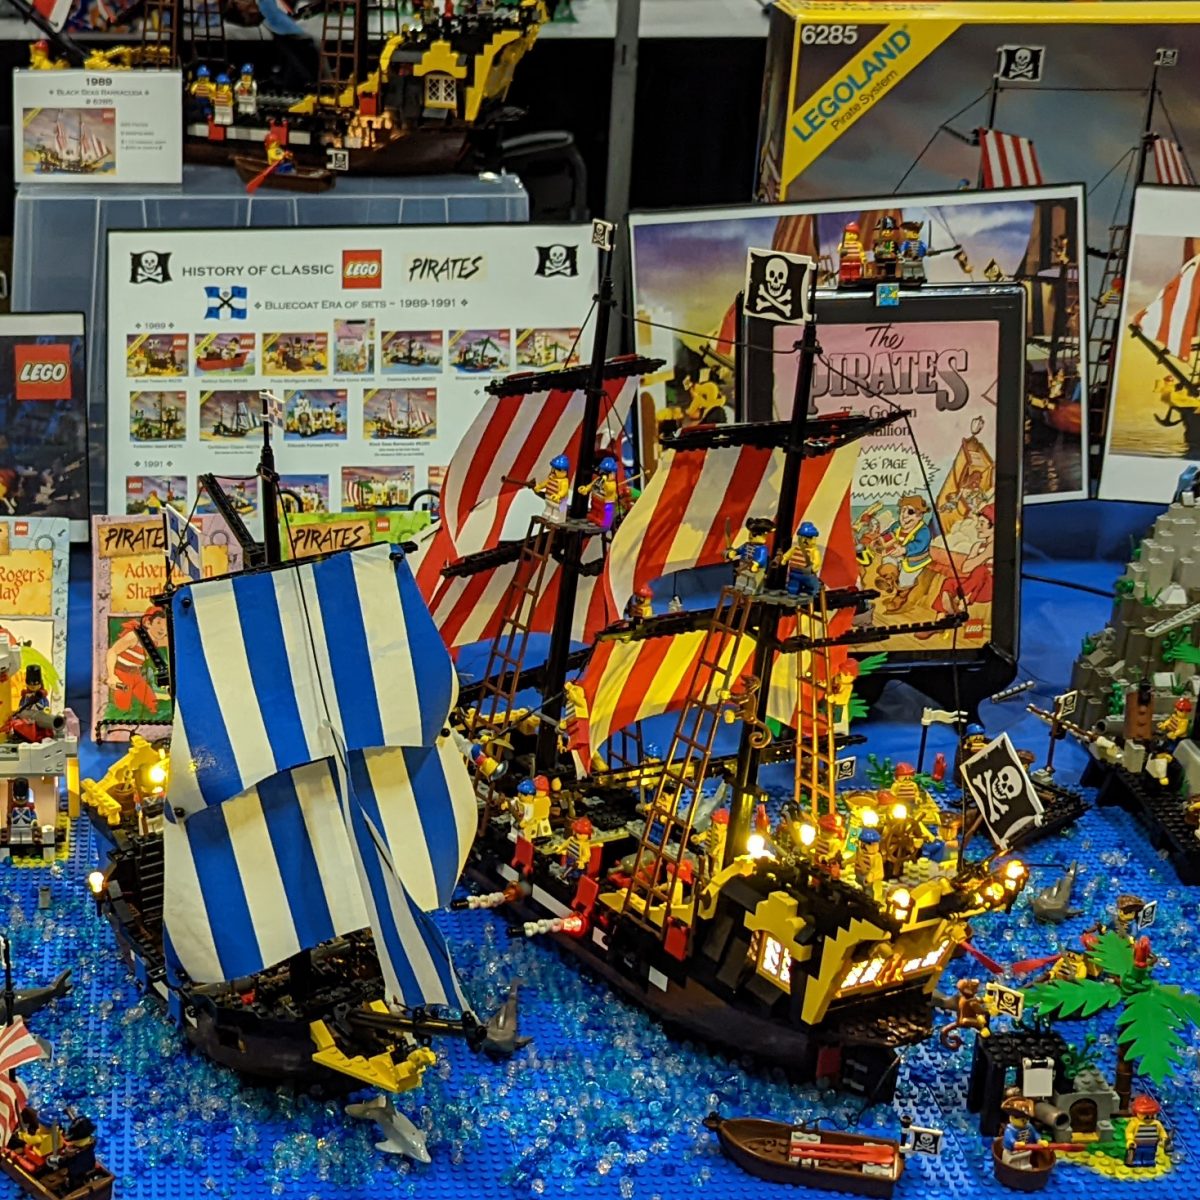 Featured Image for "Classic Pirates at Bricks Cascade 2022" by PxChris